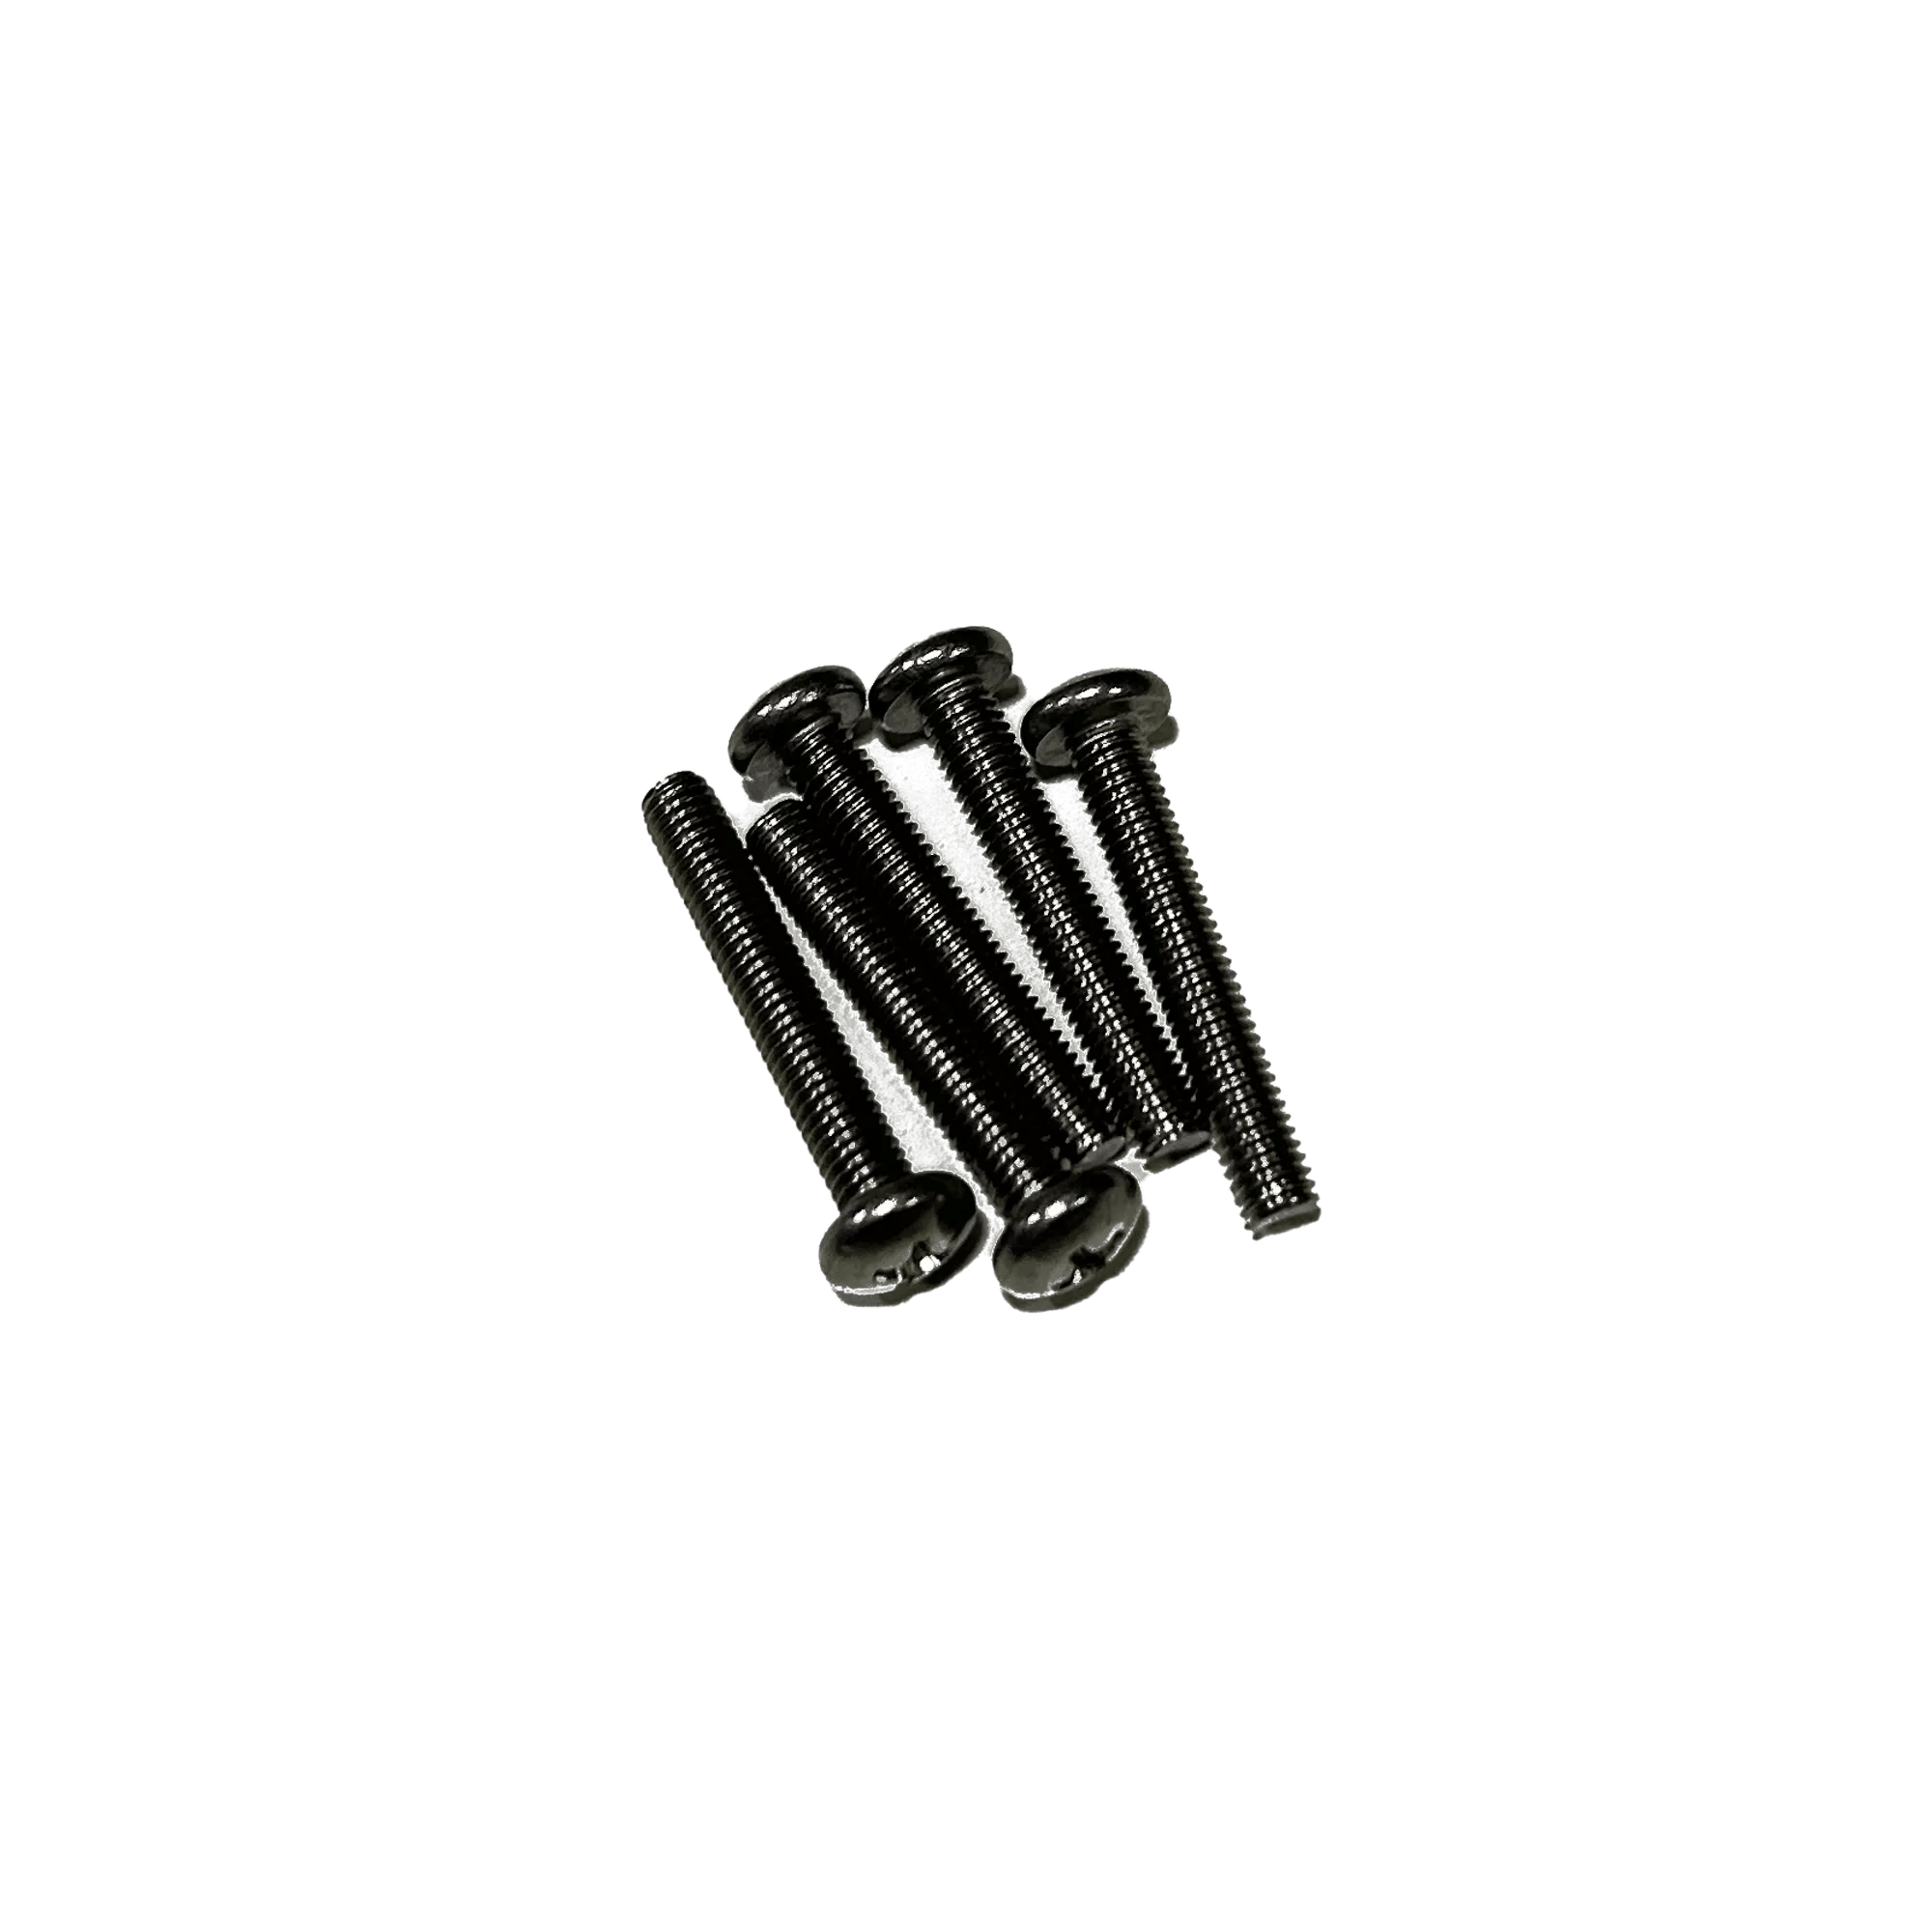 WILDERNESS SYSTEMS - Panhead Screws - #10-32 x 1 1/4 in. - 5 Pack -  - 9800846 - 